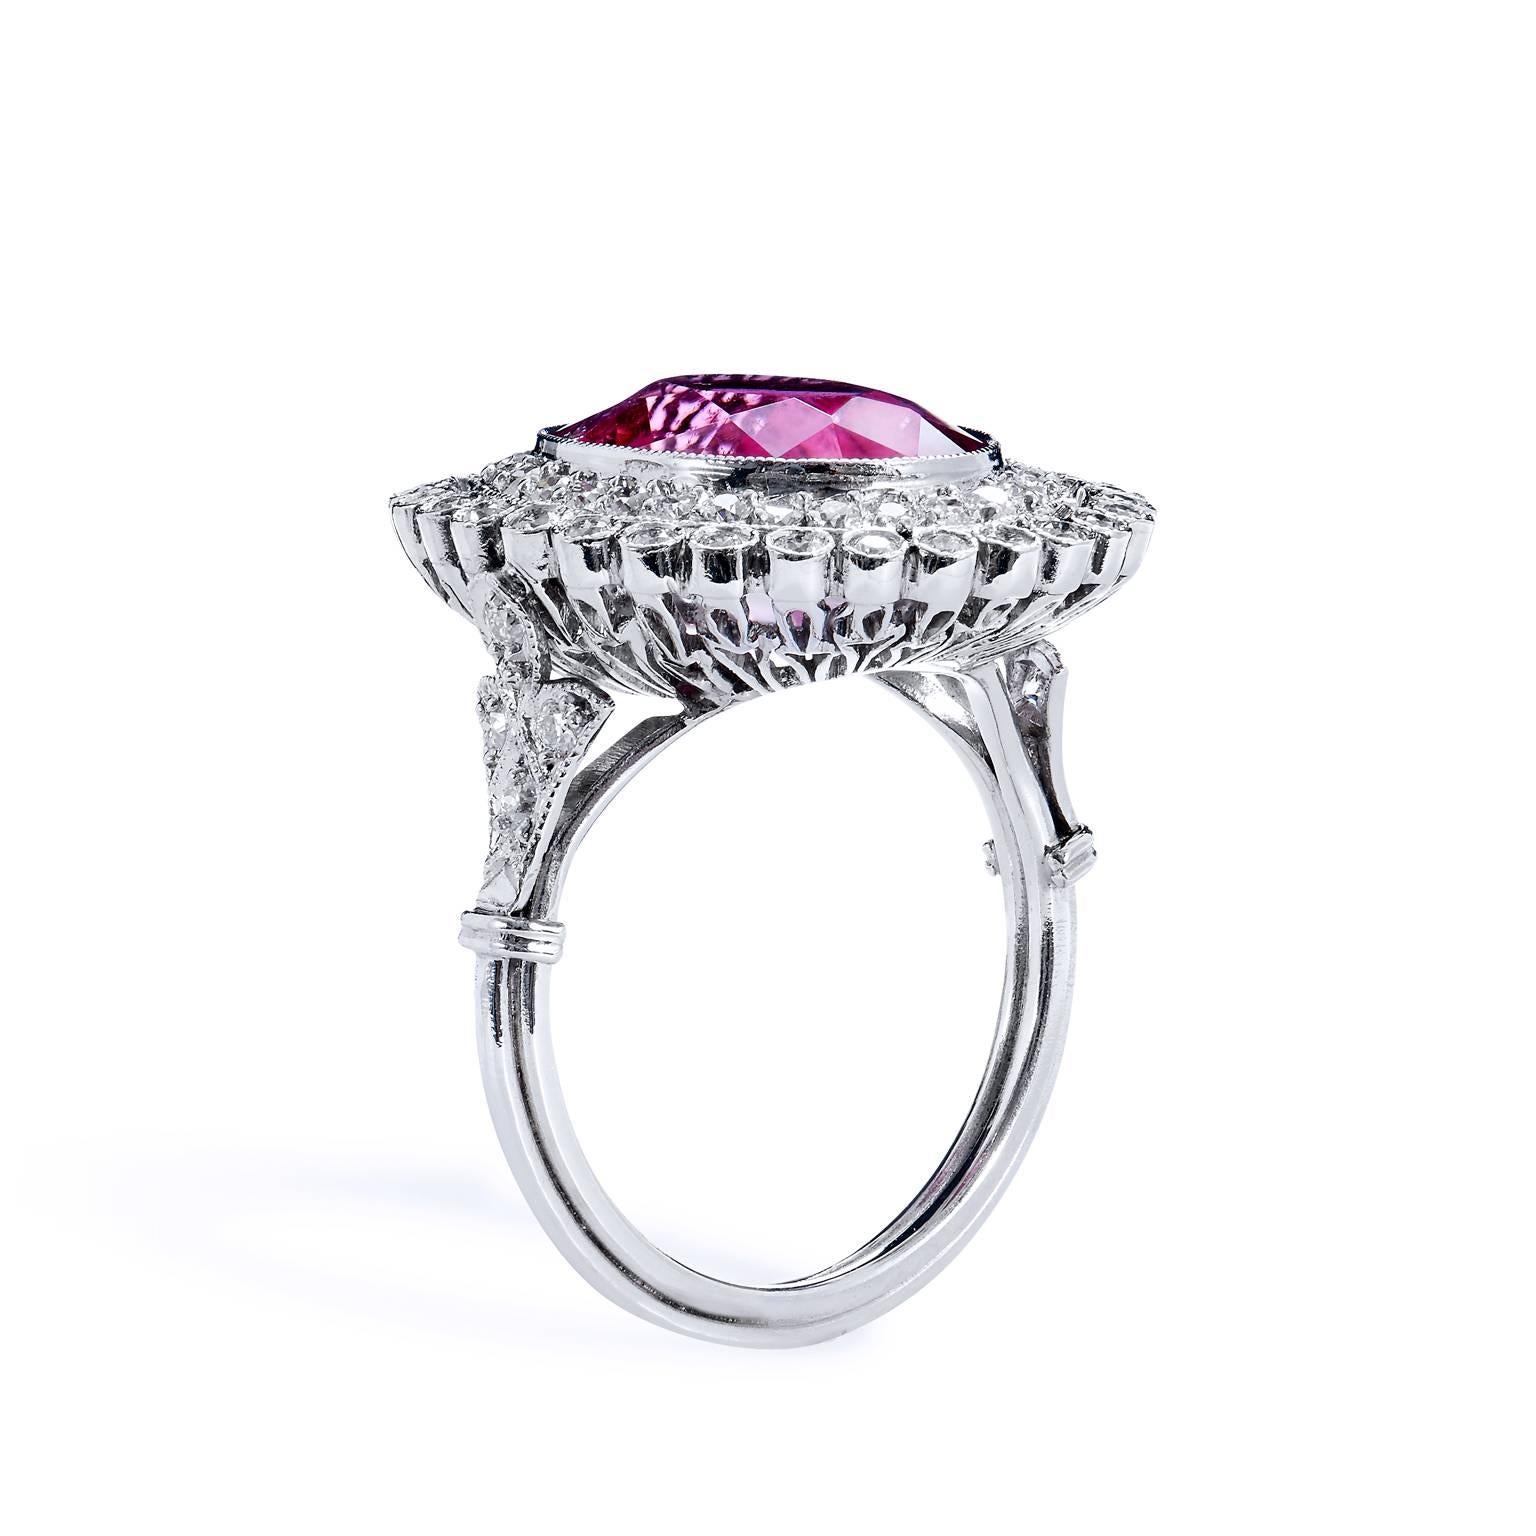 Art Deco Inspired 5.96 Carat Pink Tourmaline and Diamond Halo Platinum Ring 7.5 In New Condition For Sale In Miami, FL